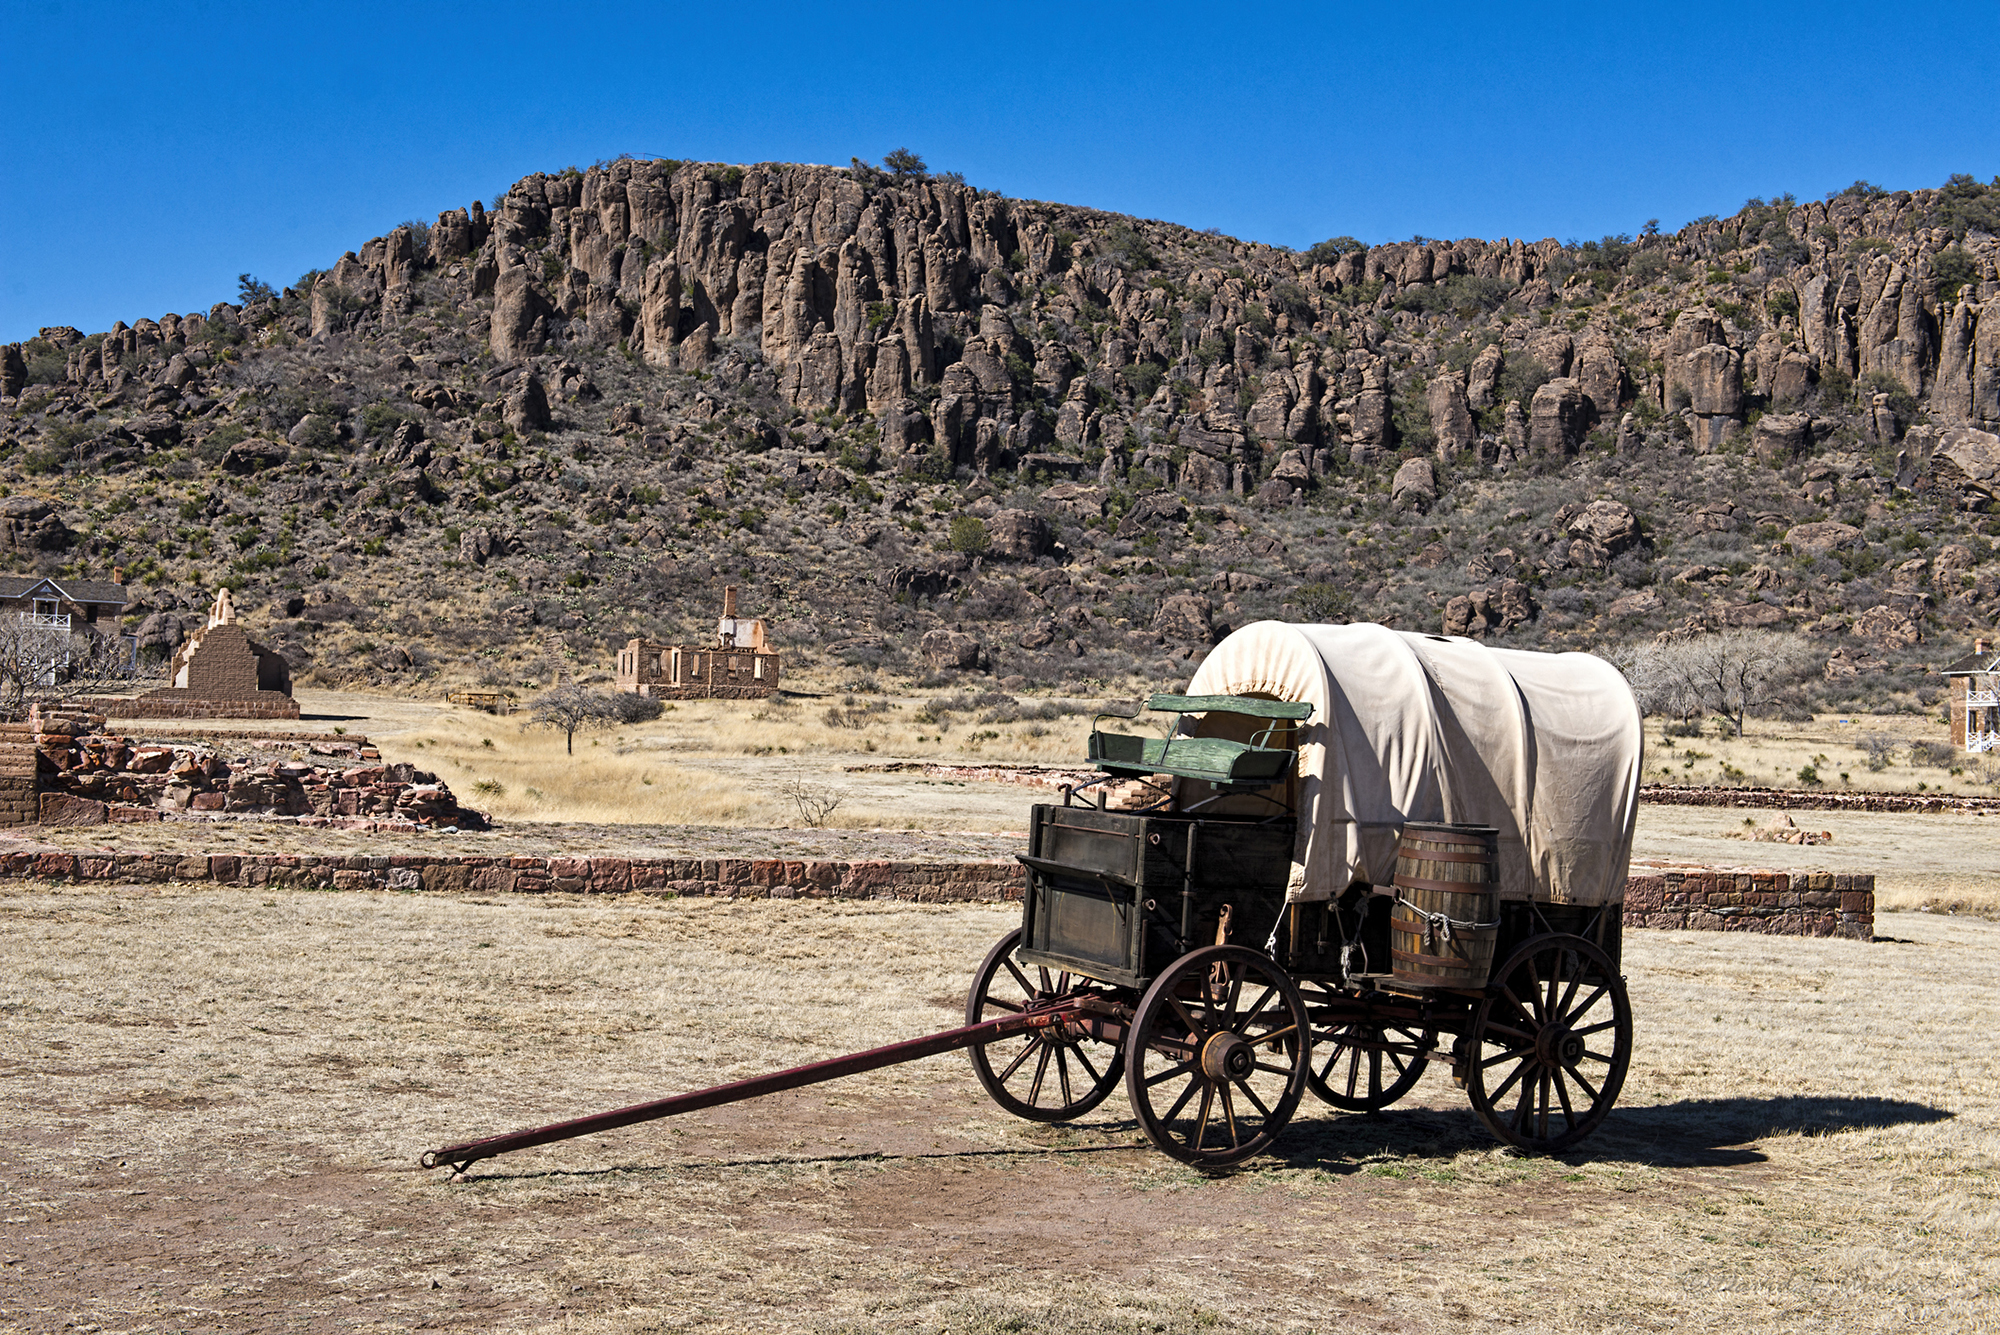 Covered wagon with stark rocks in the background.